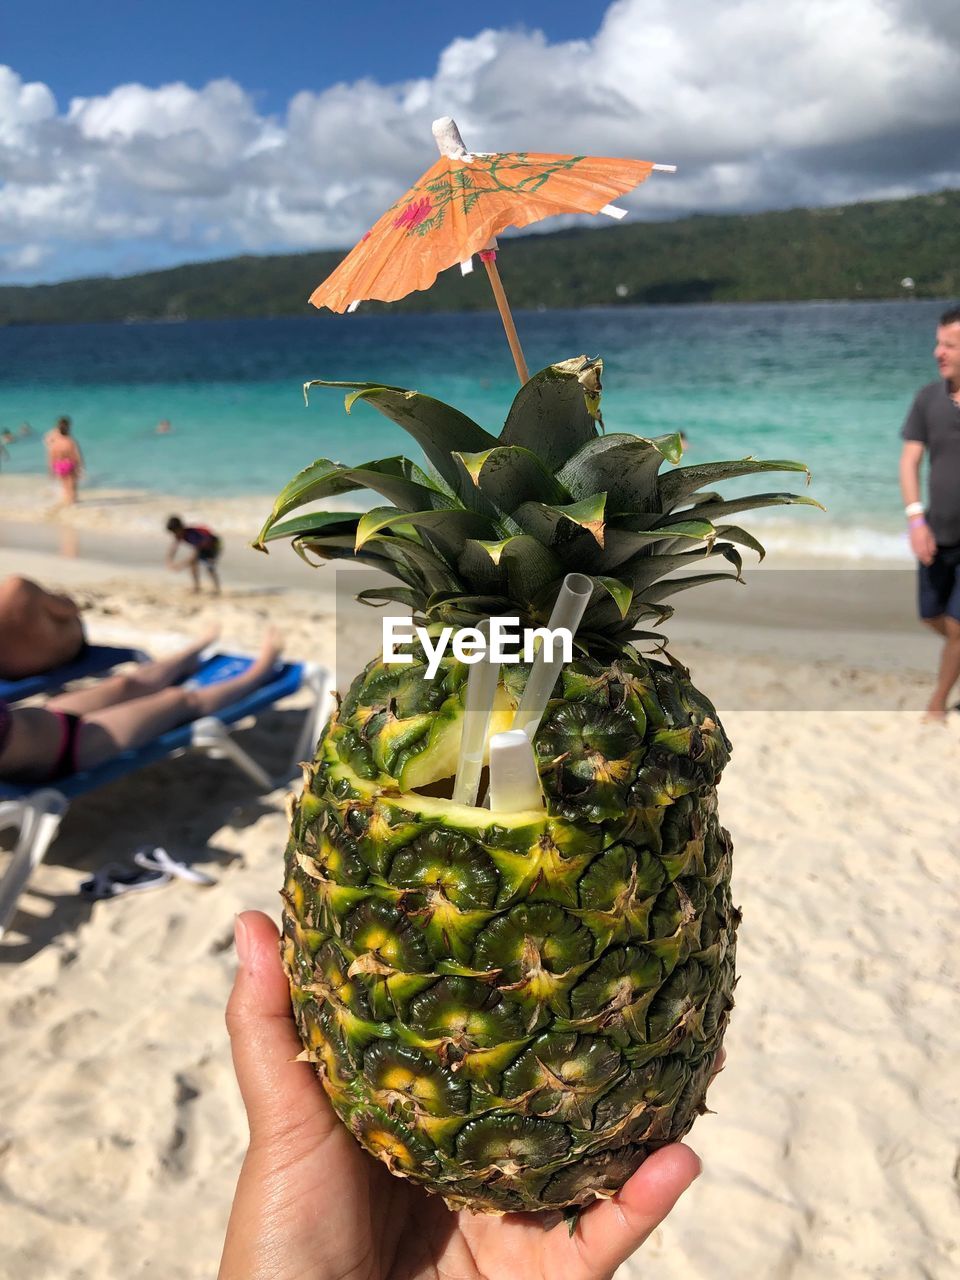 Cropped hand holding pineapple at beach against sky